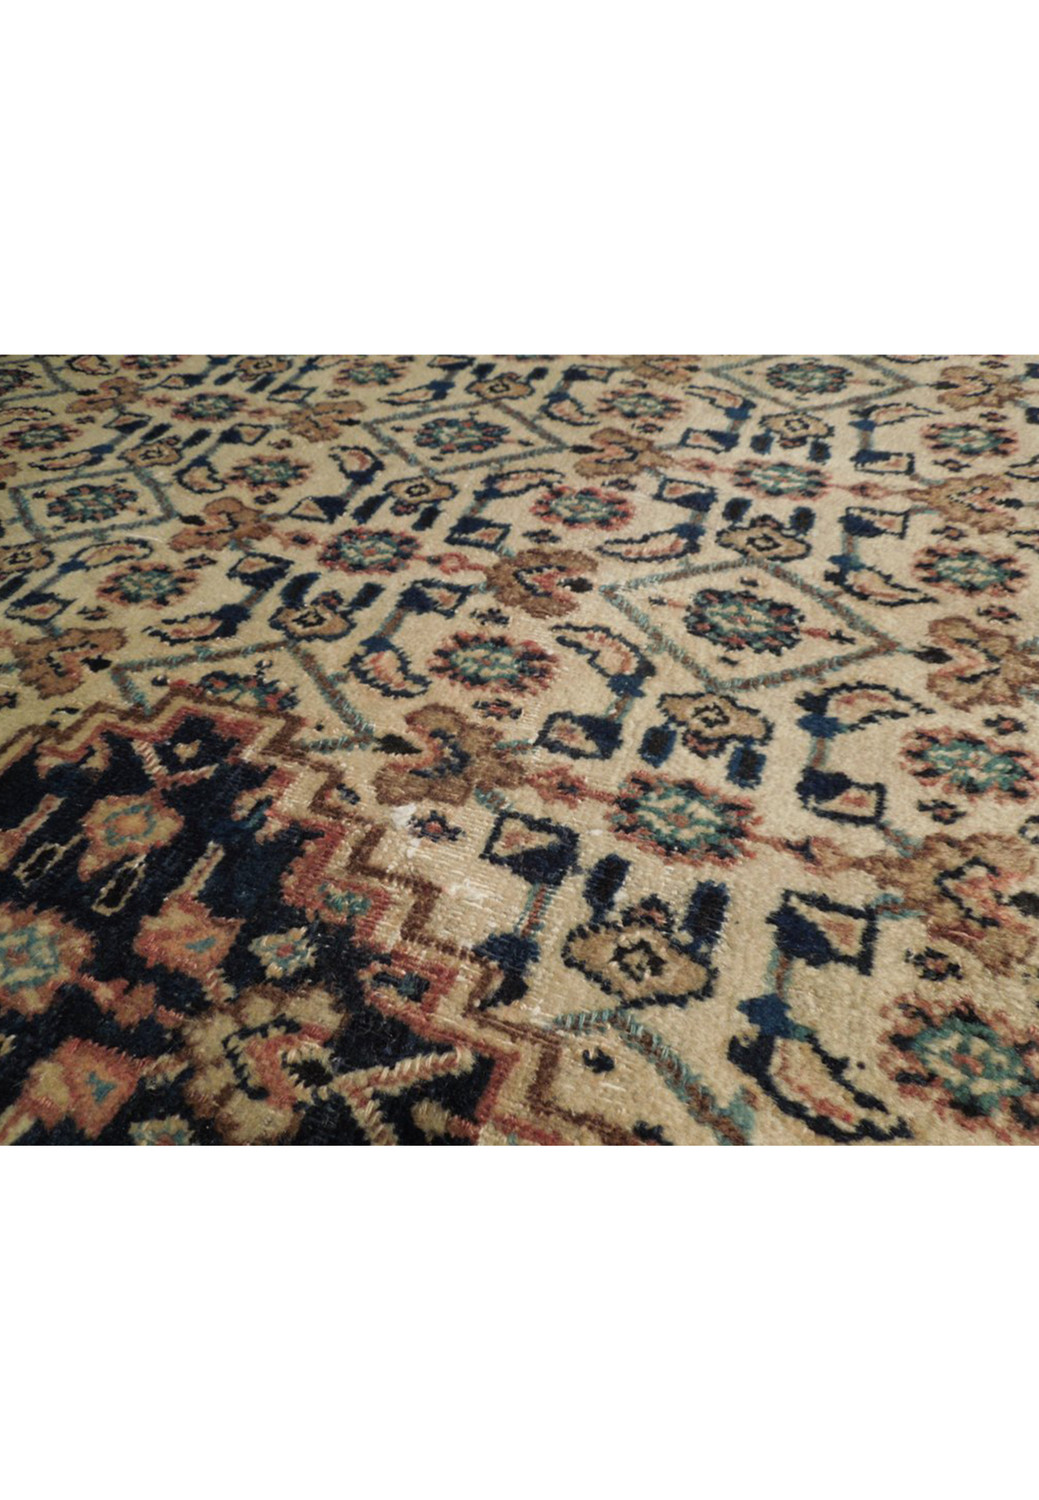 10x13 Persian Bijar Rug showcasing unique color variances and traditional patterns."